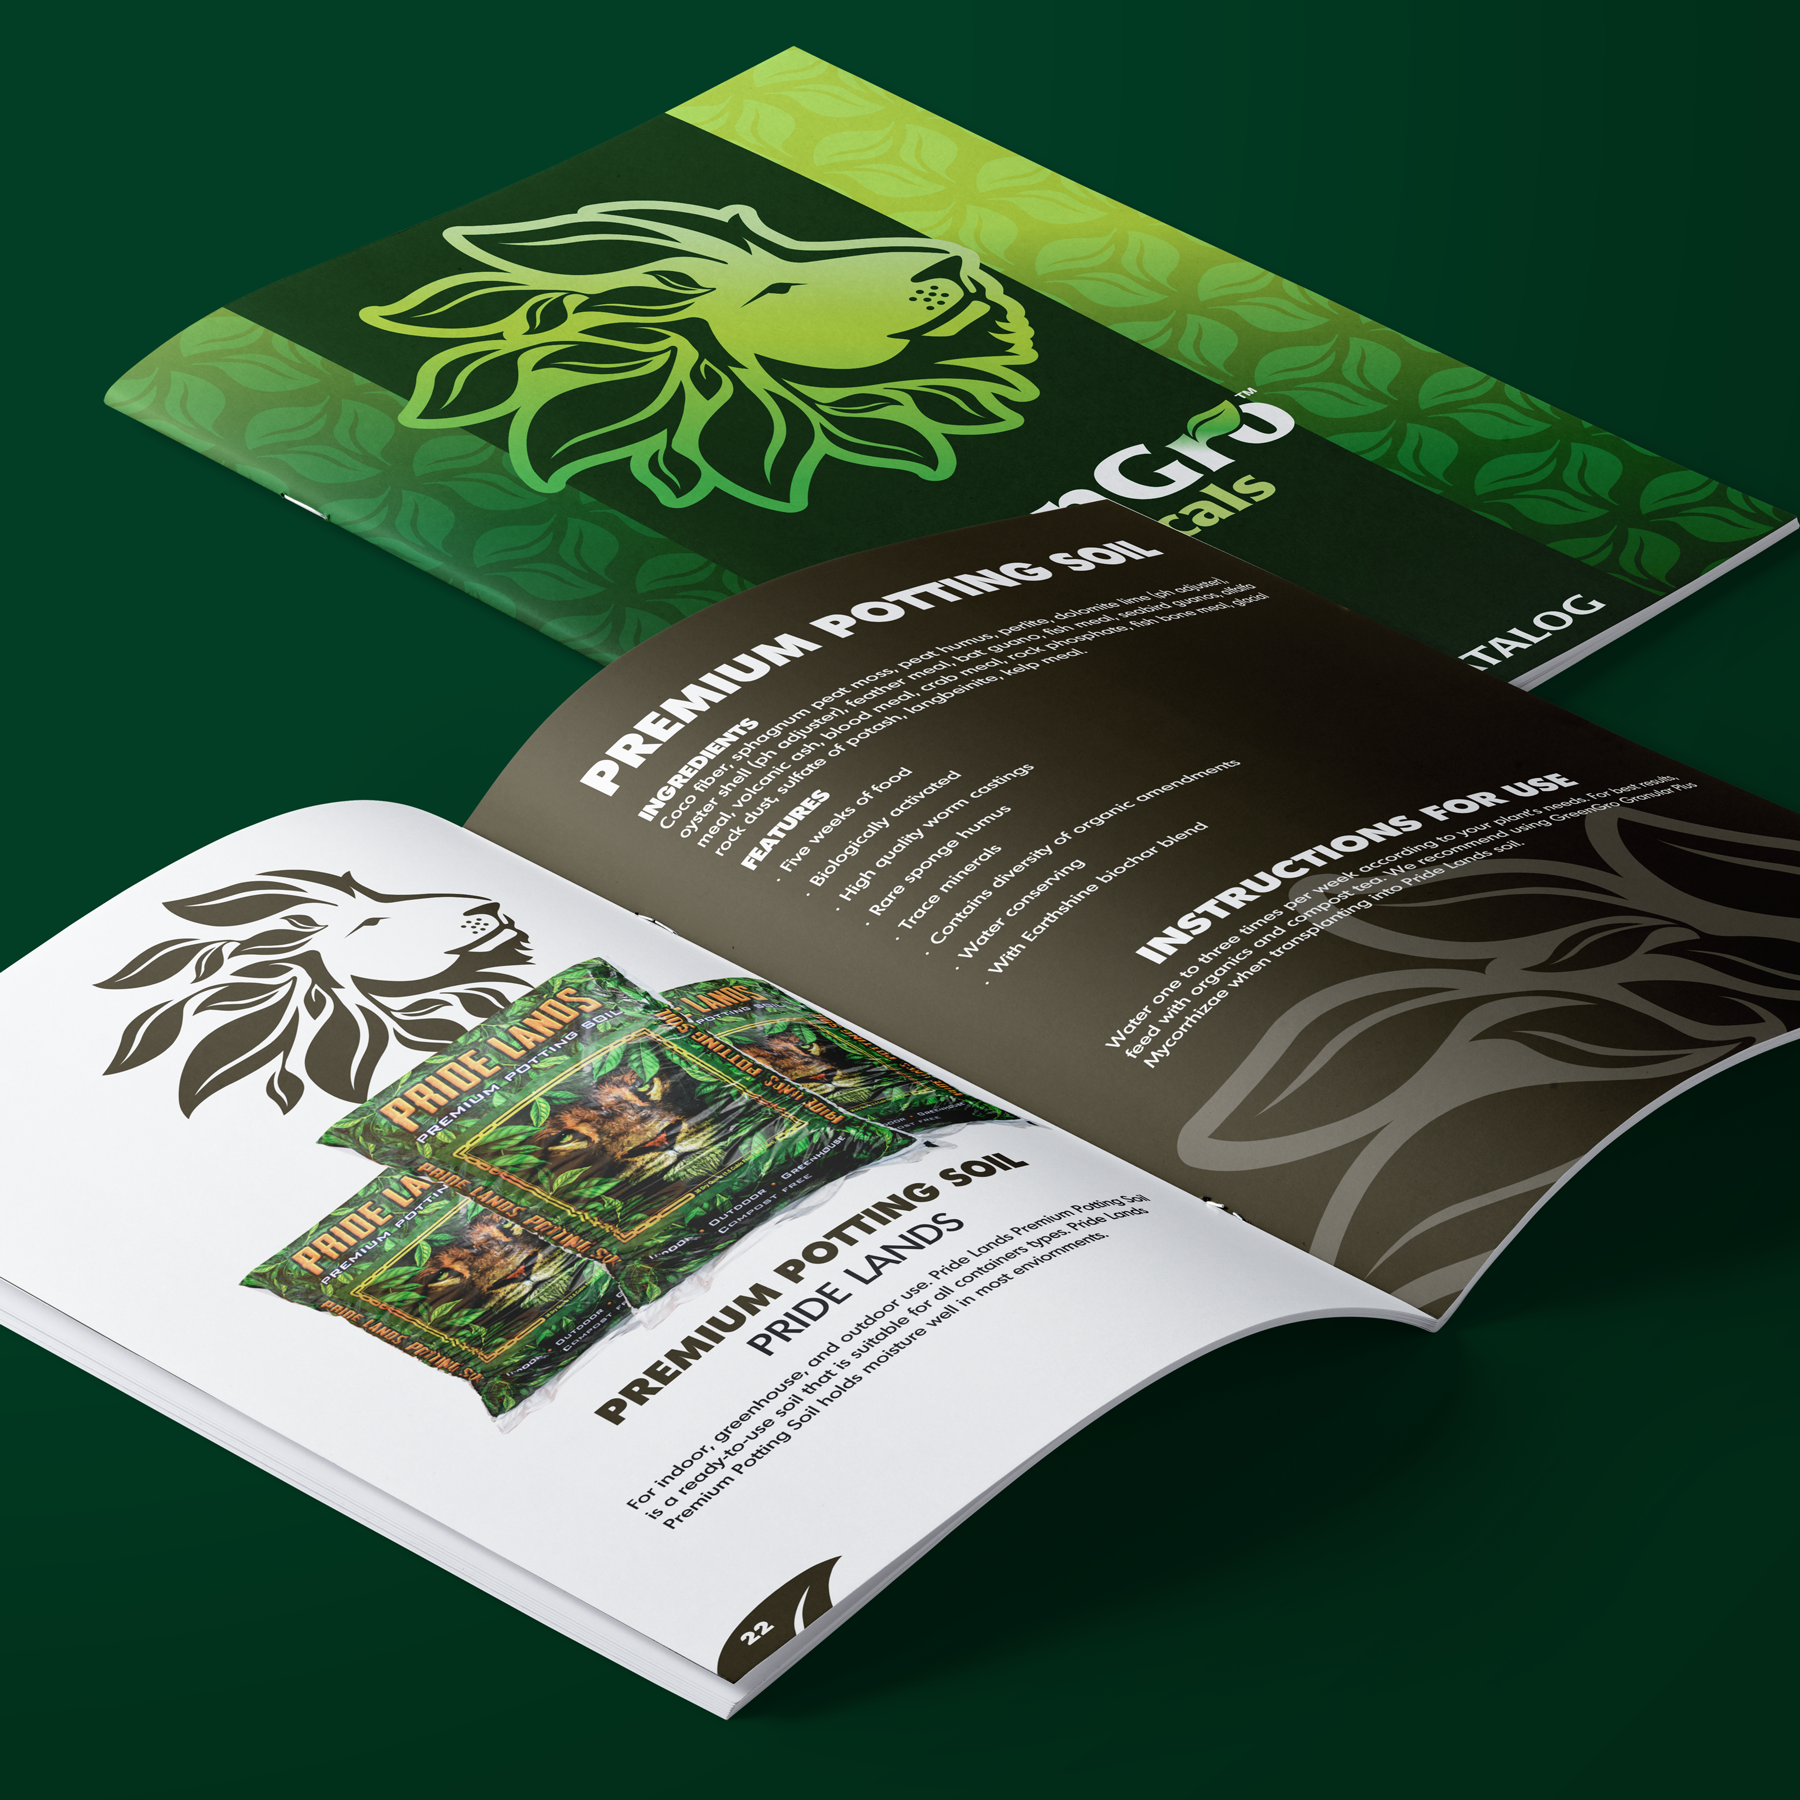 Image of Catalog with book open to Premium potting soil